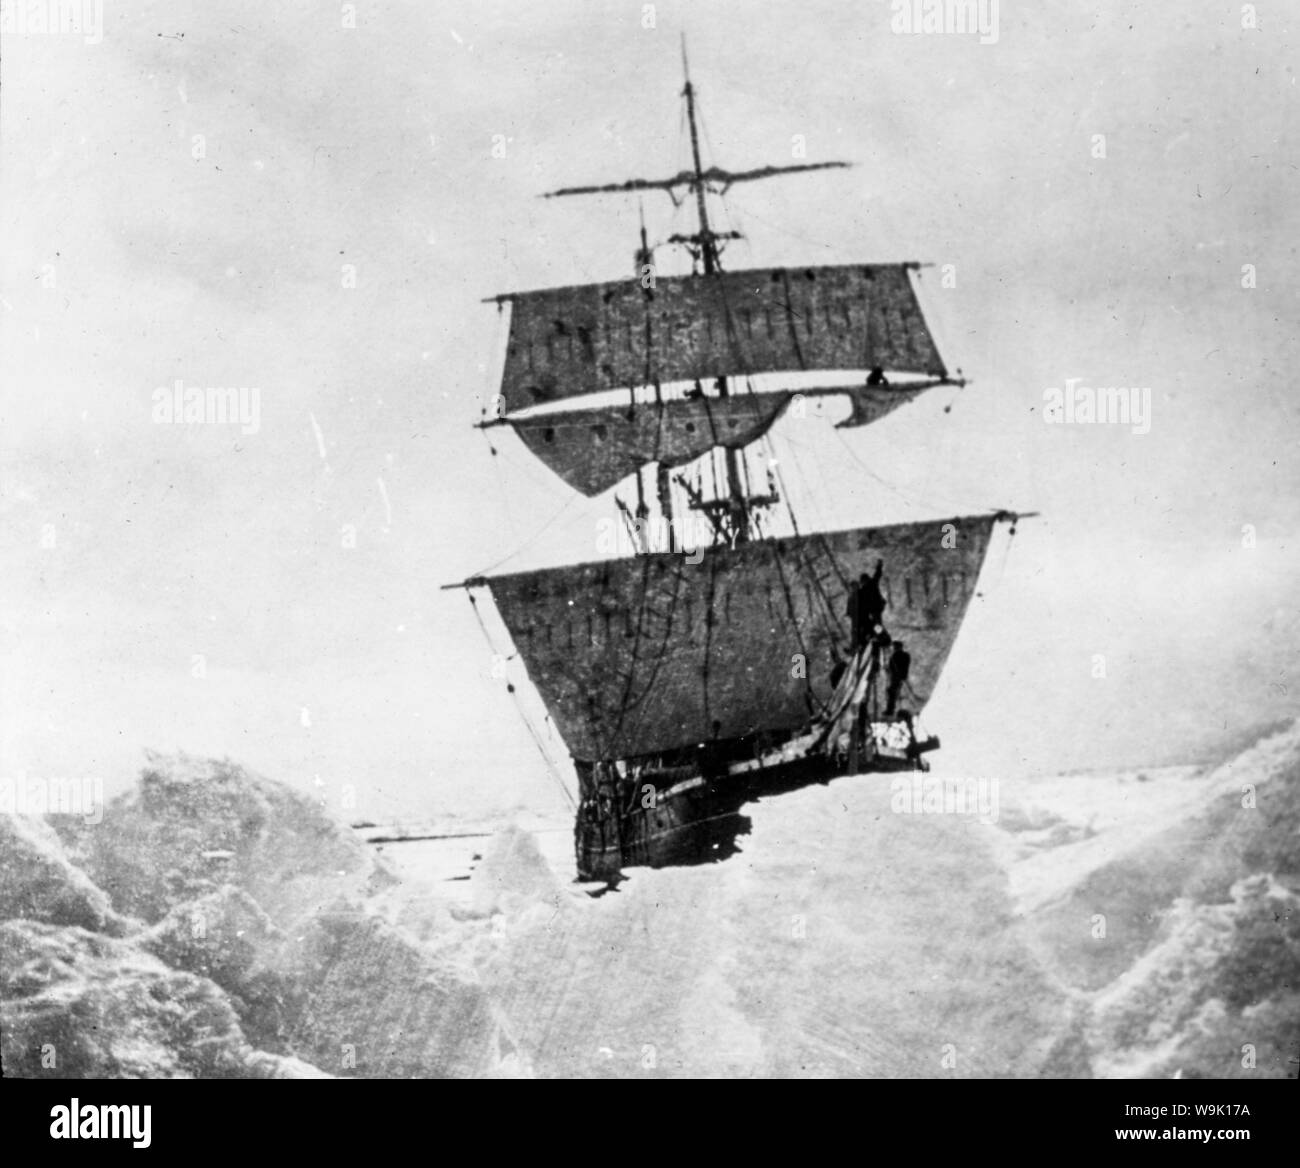 The Nimrod, Ernest Shackleton's ship held up in the Ice on the British Antarctic Expedition to the South Pole in 1908-1909, photograph Stock Photo